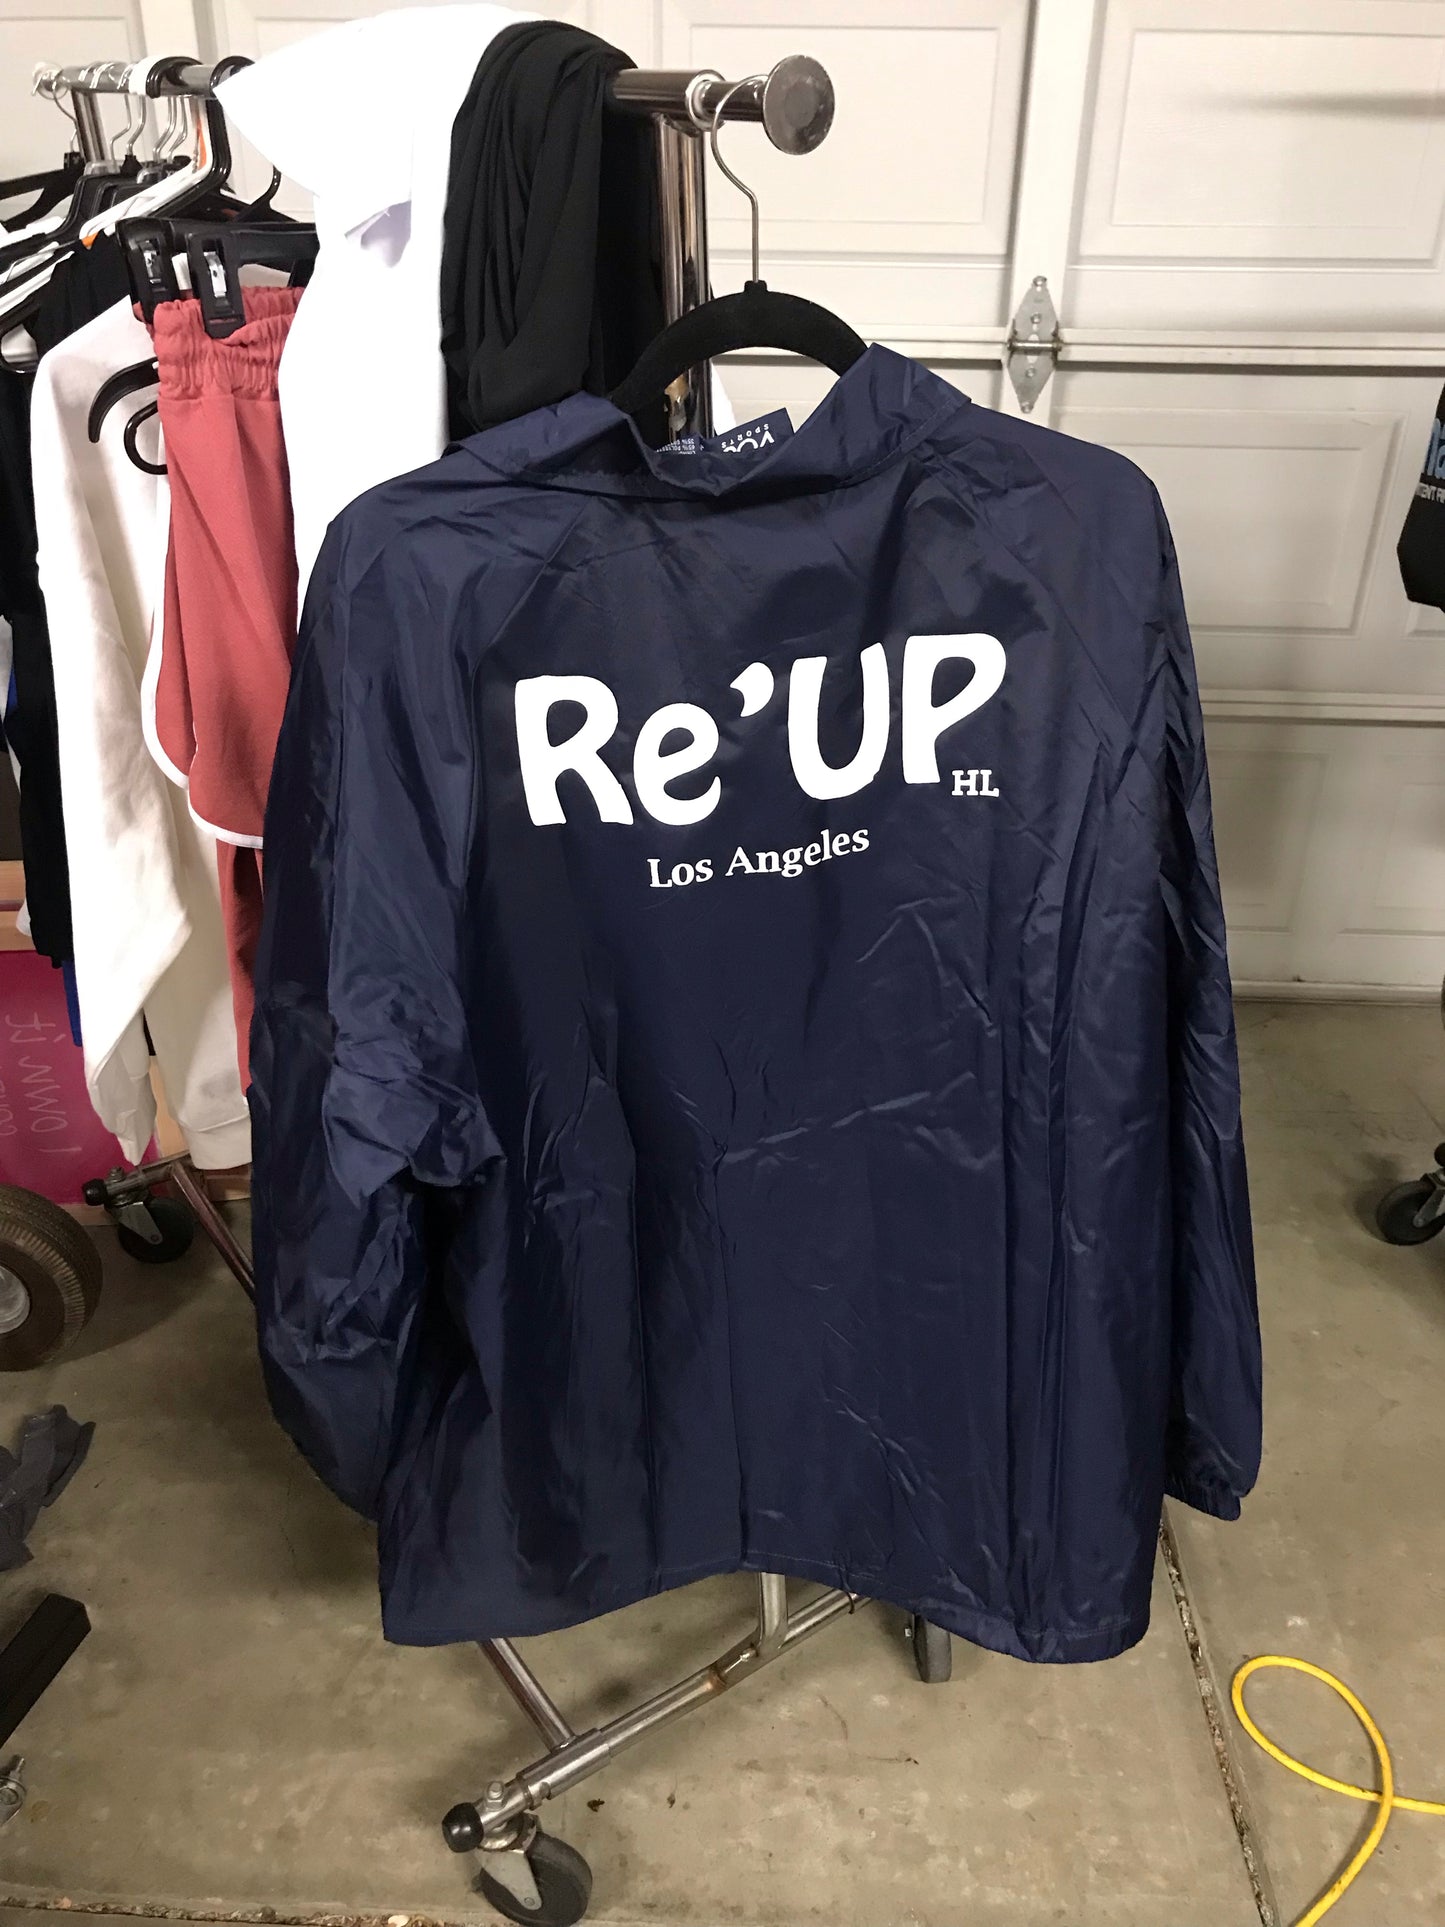 Re’up jackets